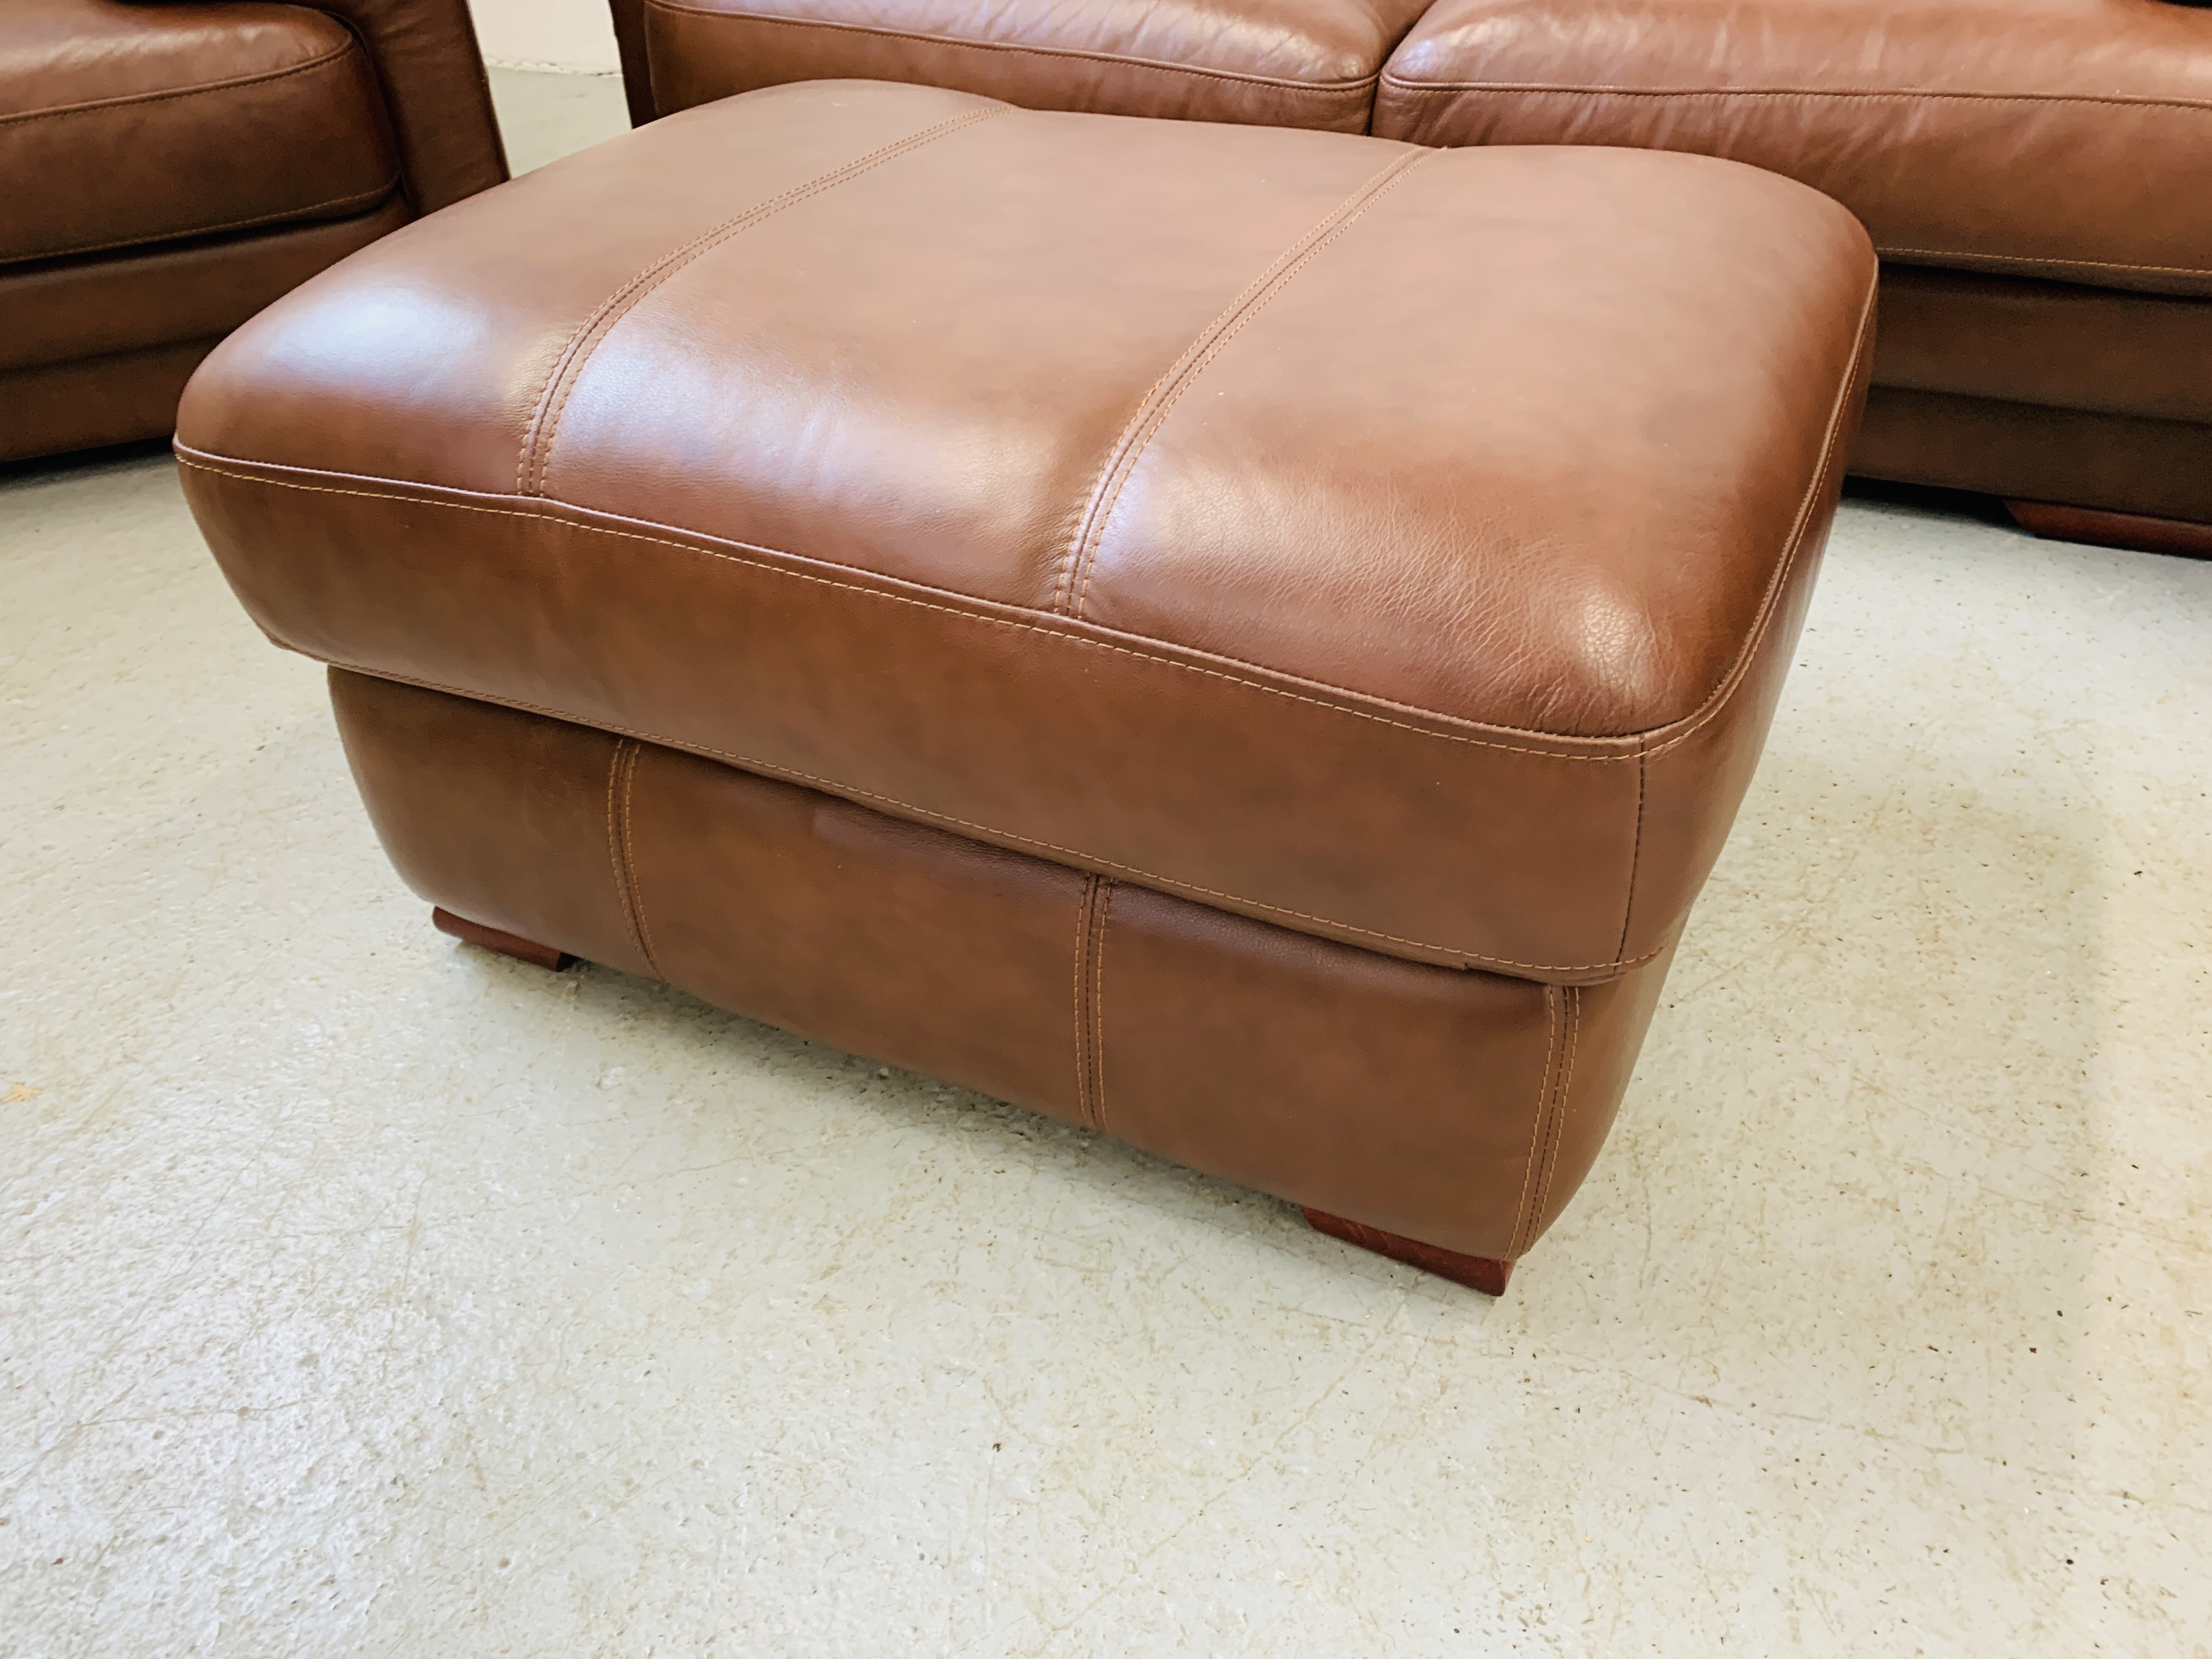 A GOOD QUALITY TAN LEATHER THREE PIECE LOUNGE SUITE WITH MATCHING FOOT STOOL - Image 4 of 24